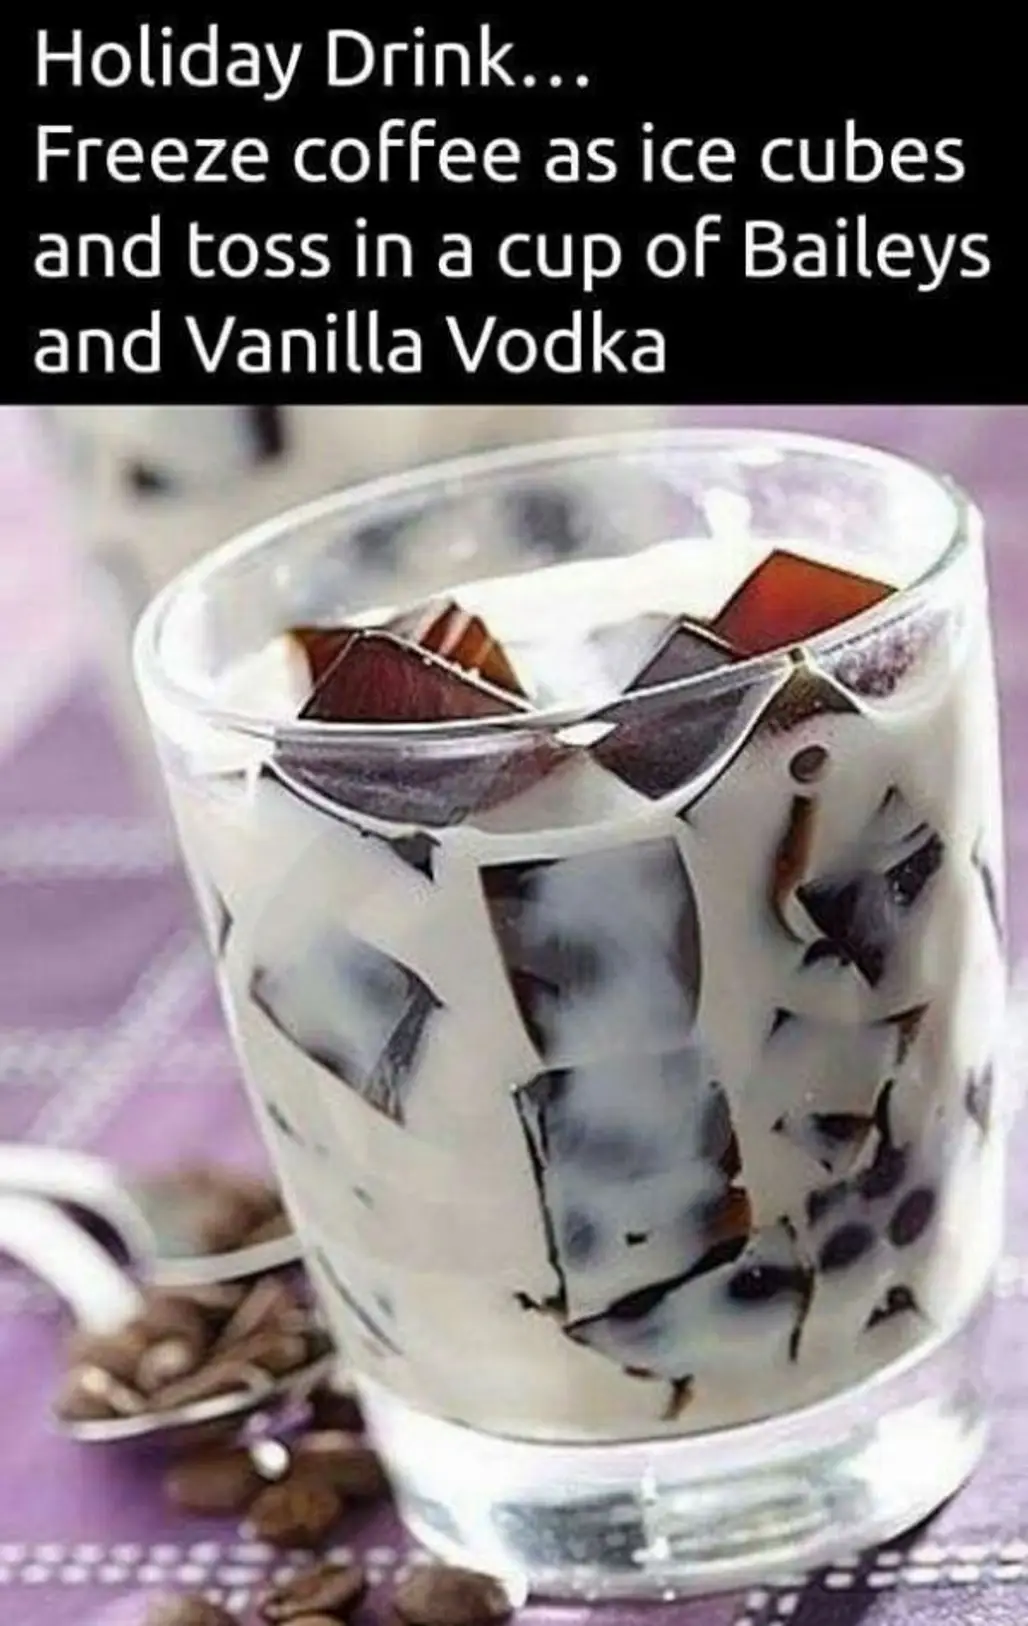 Frozen Coffee Cubes Make Any Drink a Coffee Drink!